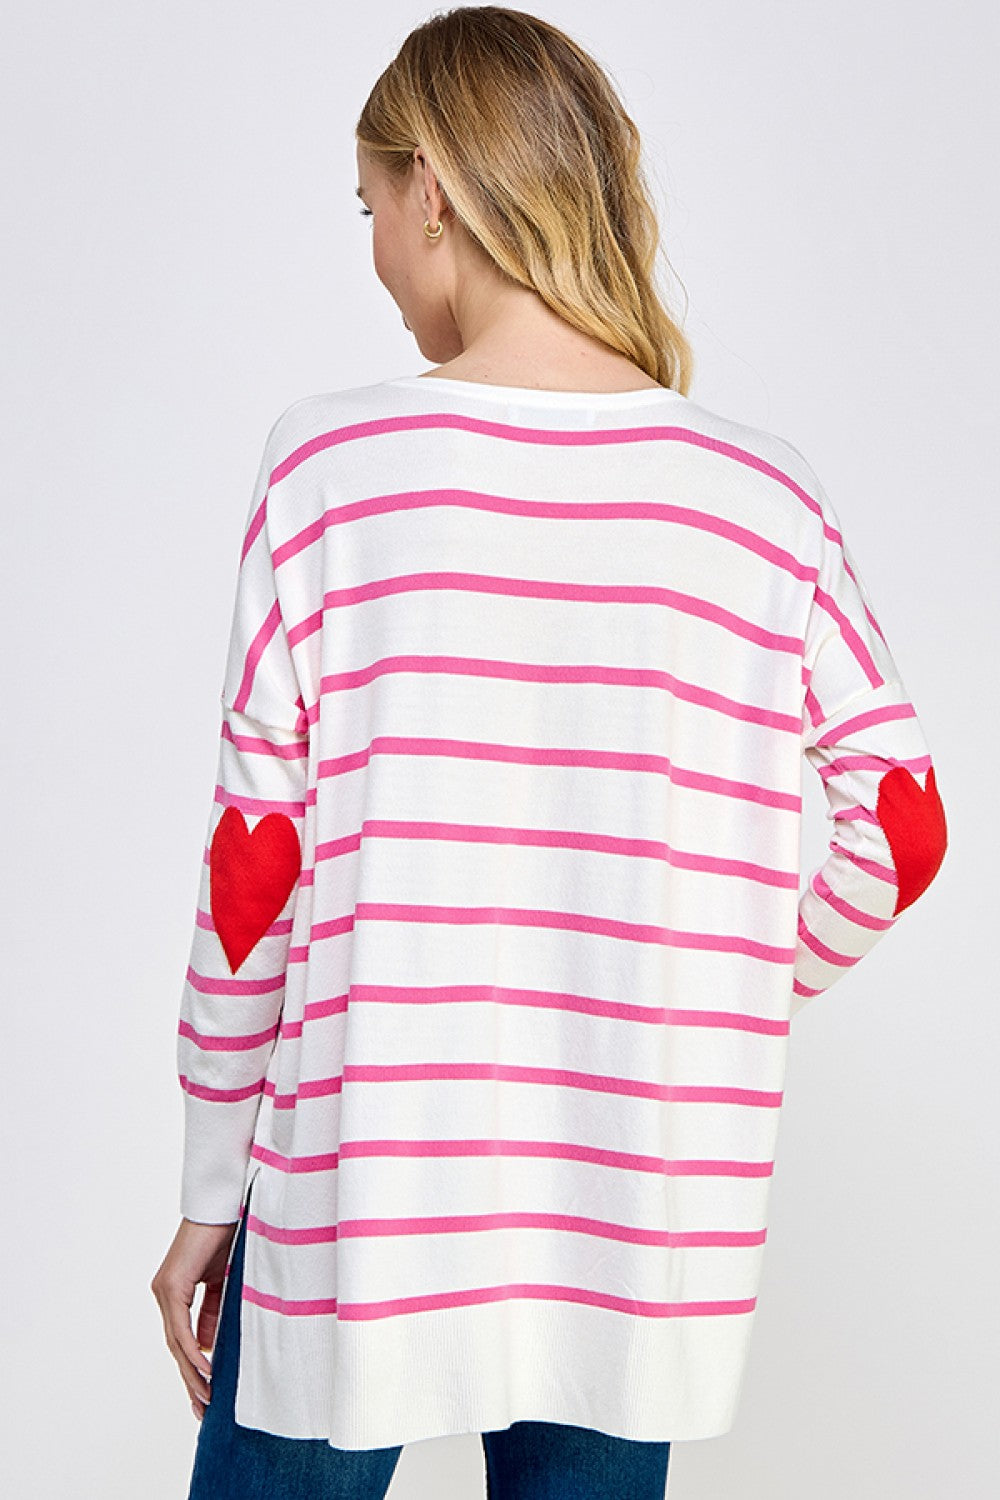 White & Pink Sweater Top w/ Heart Accents